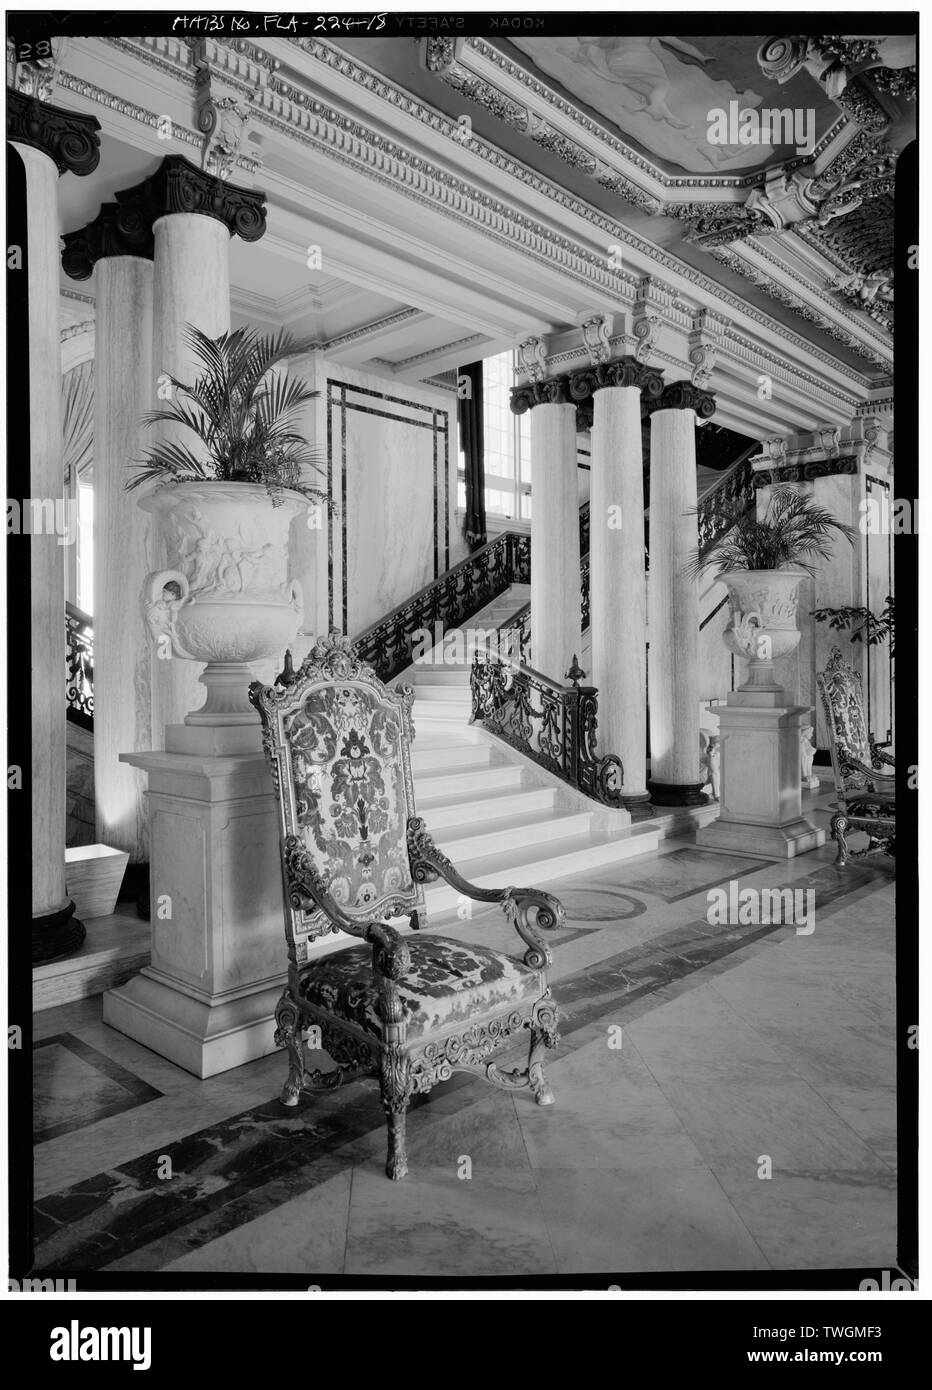 RIGHT FLIGHT OF DOUBLE STAIRCASE FROM MAIN HALL - Henry M. Flagler Mansion, Whitehall Way, Palm Beach, Palm Beach County, FL Stock Photo